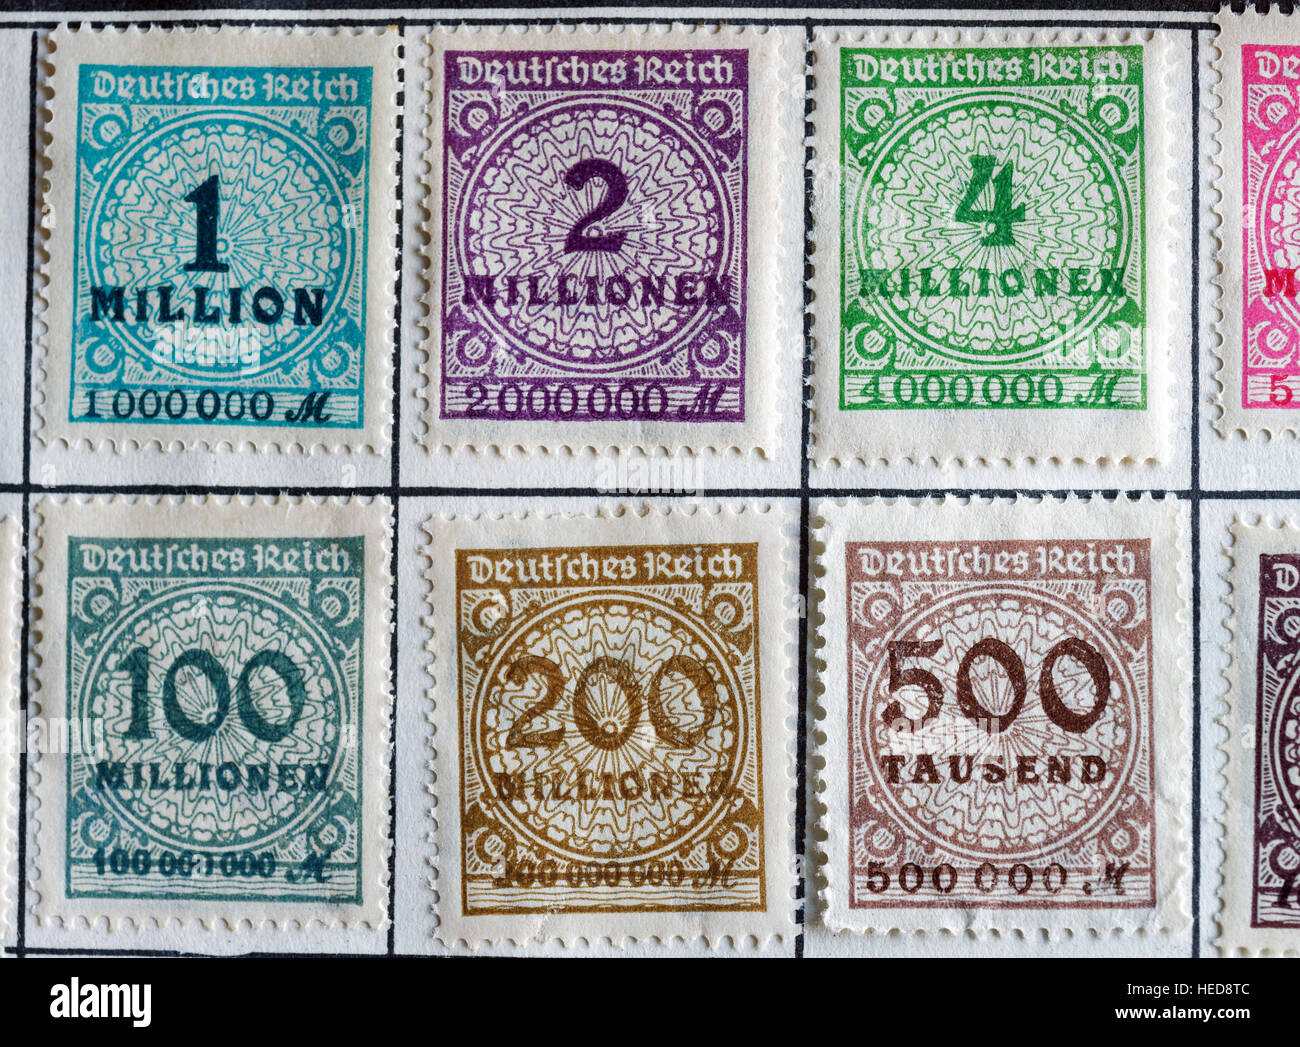 Very high value postage stamps from the German hyperinflation period of 1923 -1924 Stock Photo